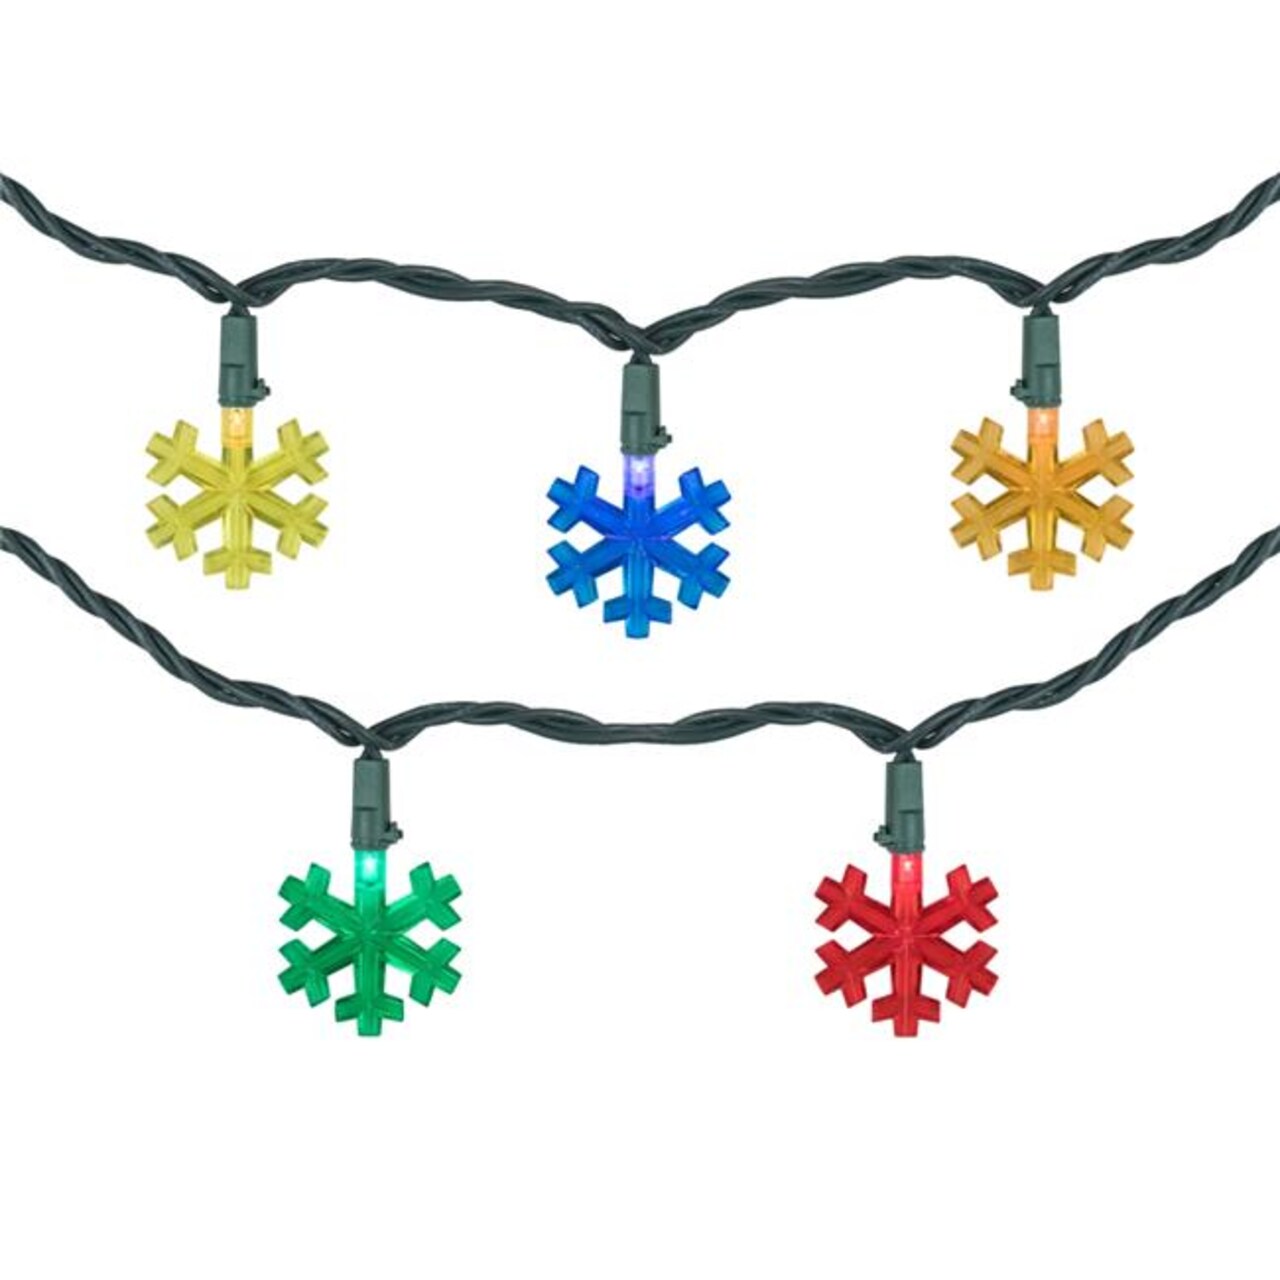 Northlight 34851764 4 ft. Green Wire Multi-Color LED Snowflake Christmas Light Set - 10 Count